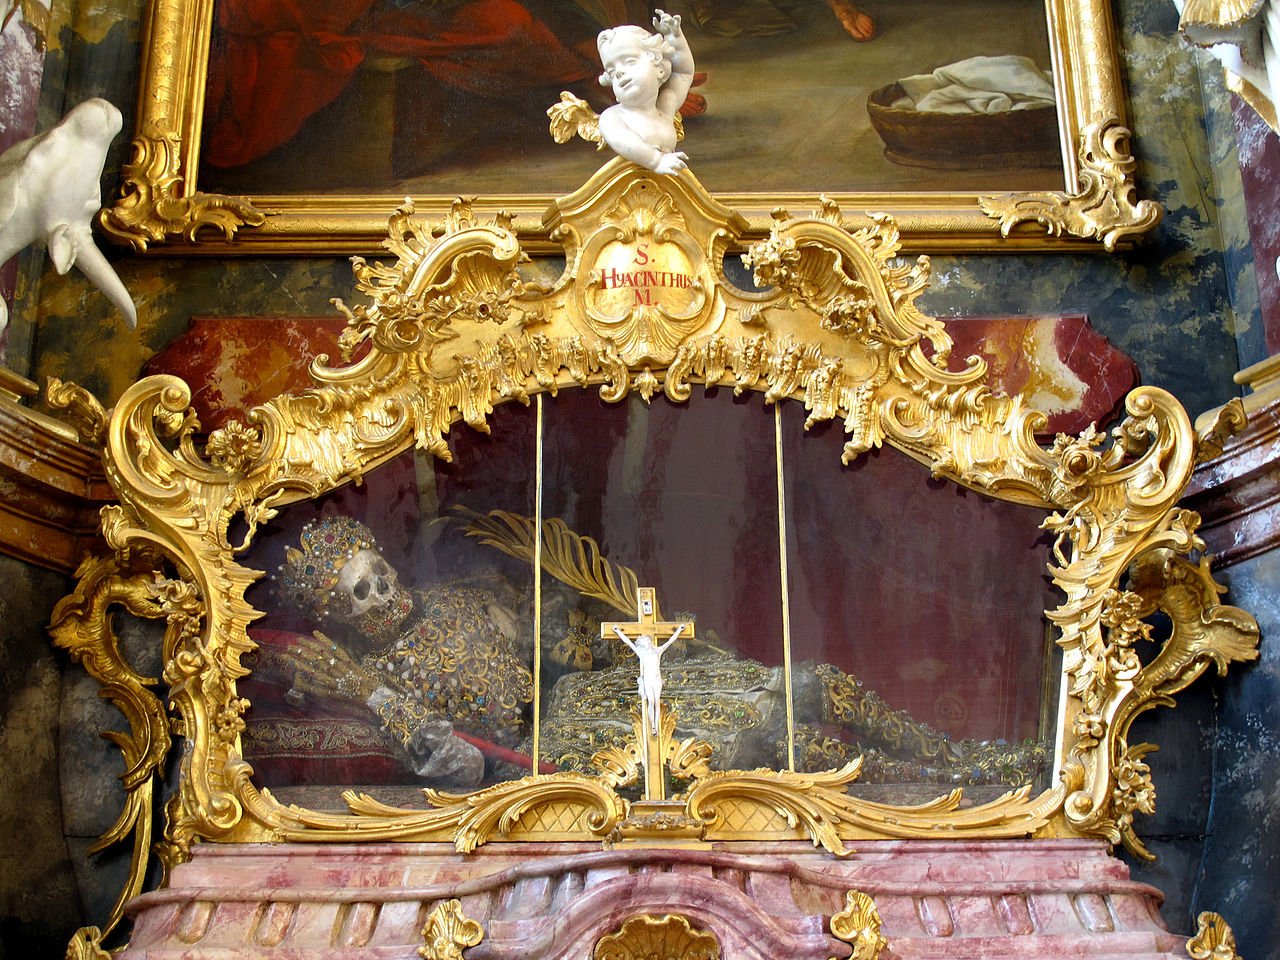 A photograph of a reliquary, a gilded elaborate box with a glass window. Lying inside is a skeleton of a saint dressed in golden clothing and a golden bejeweled crown.